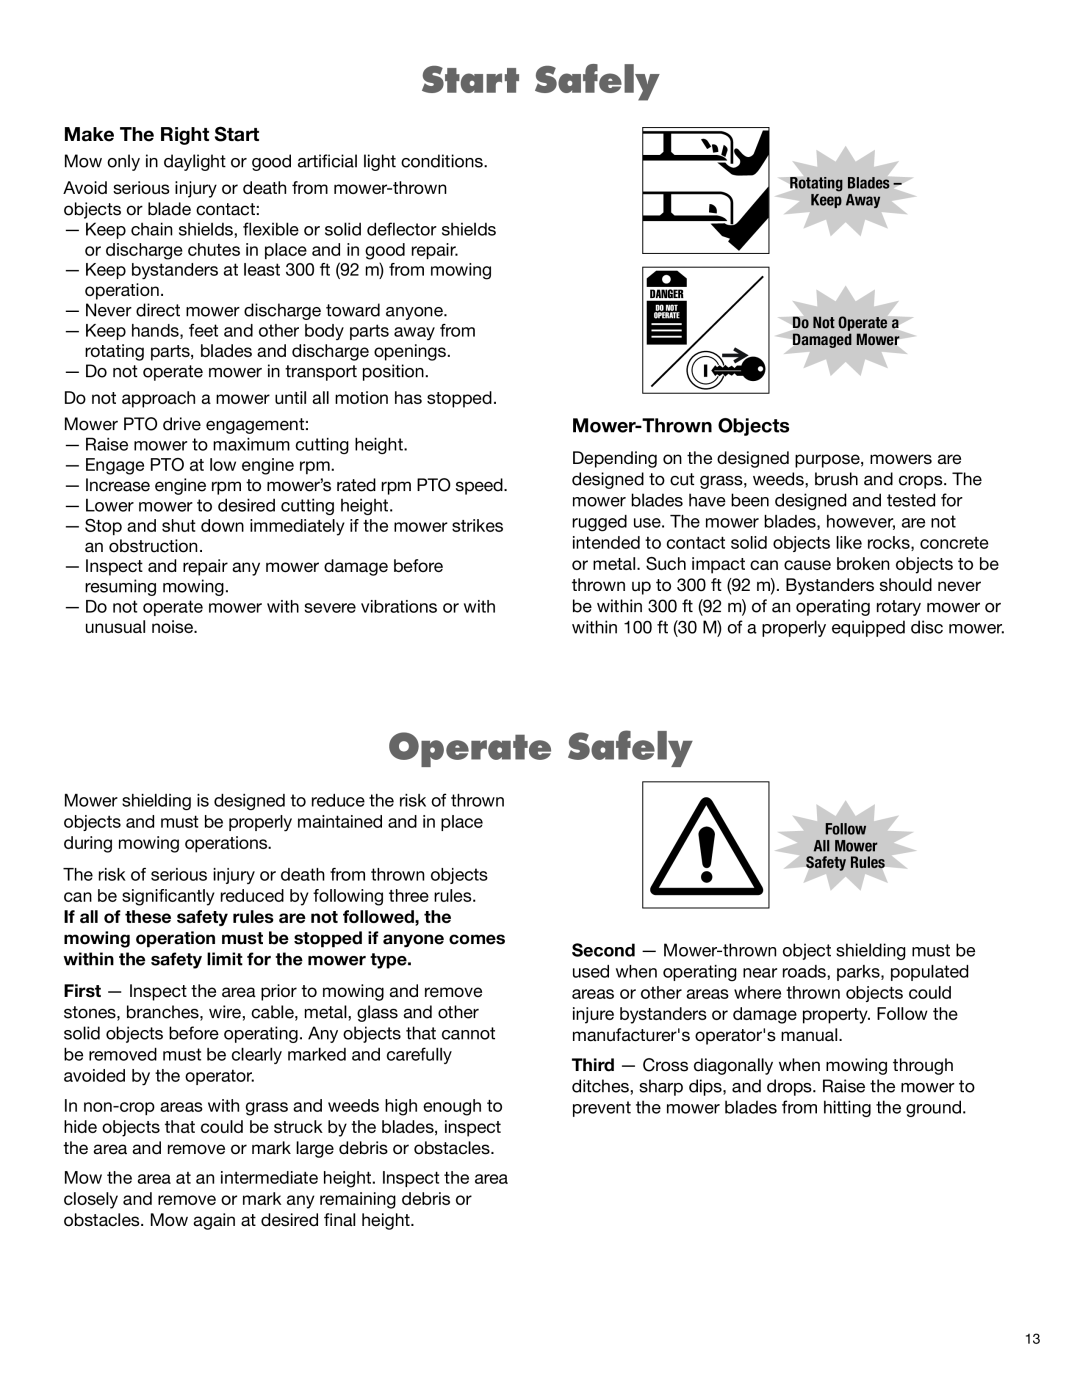 Rhino Mounts 148 manual Start Safely, Operate Safely, Make The Right Start, Mower-Thrown Objects 